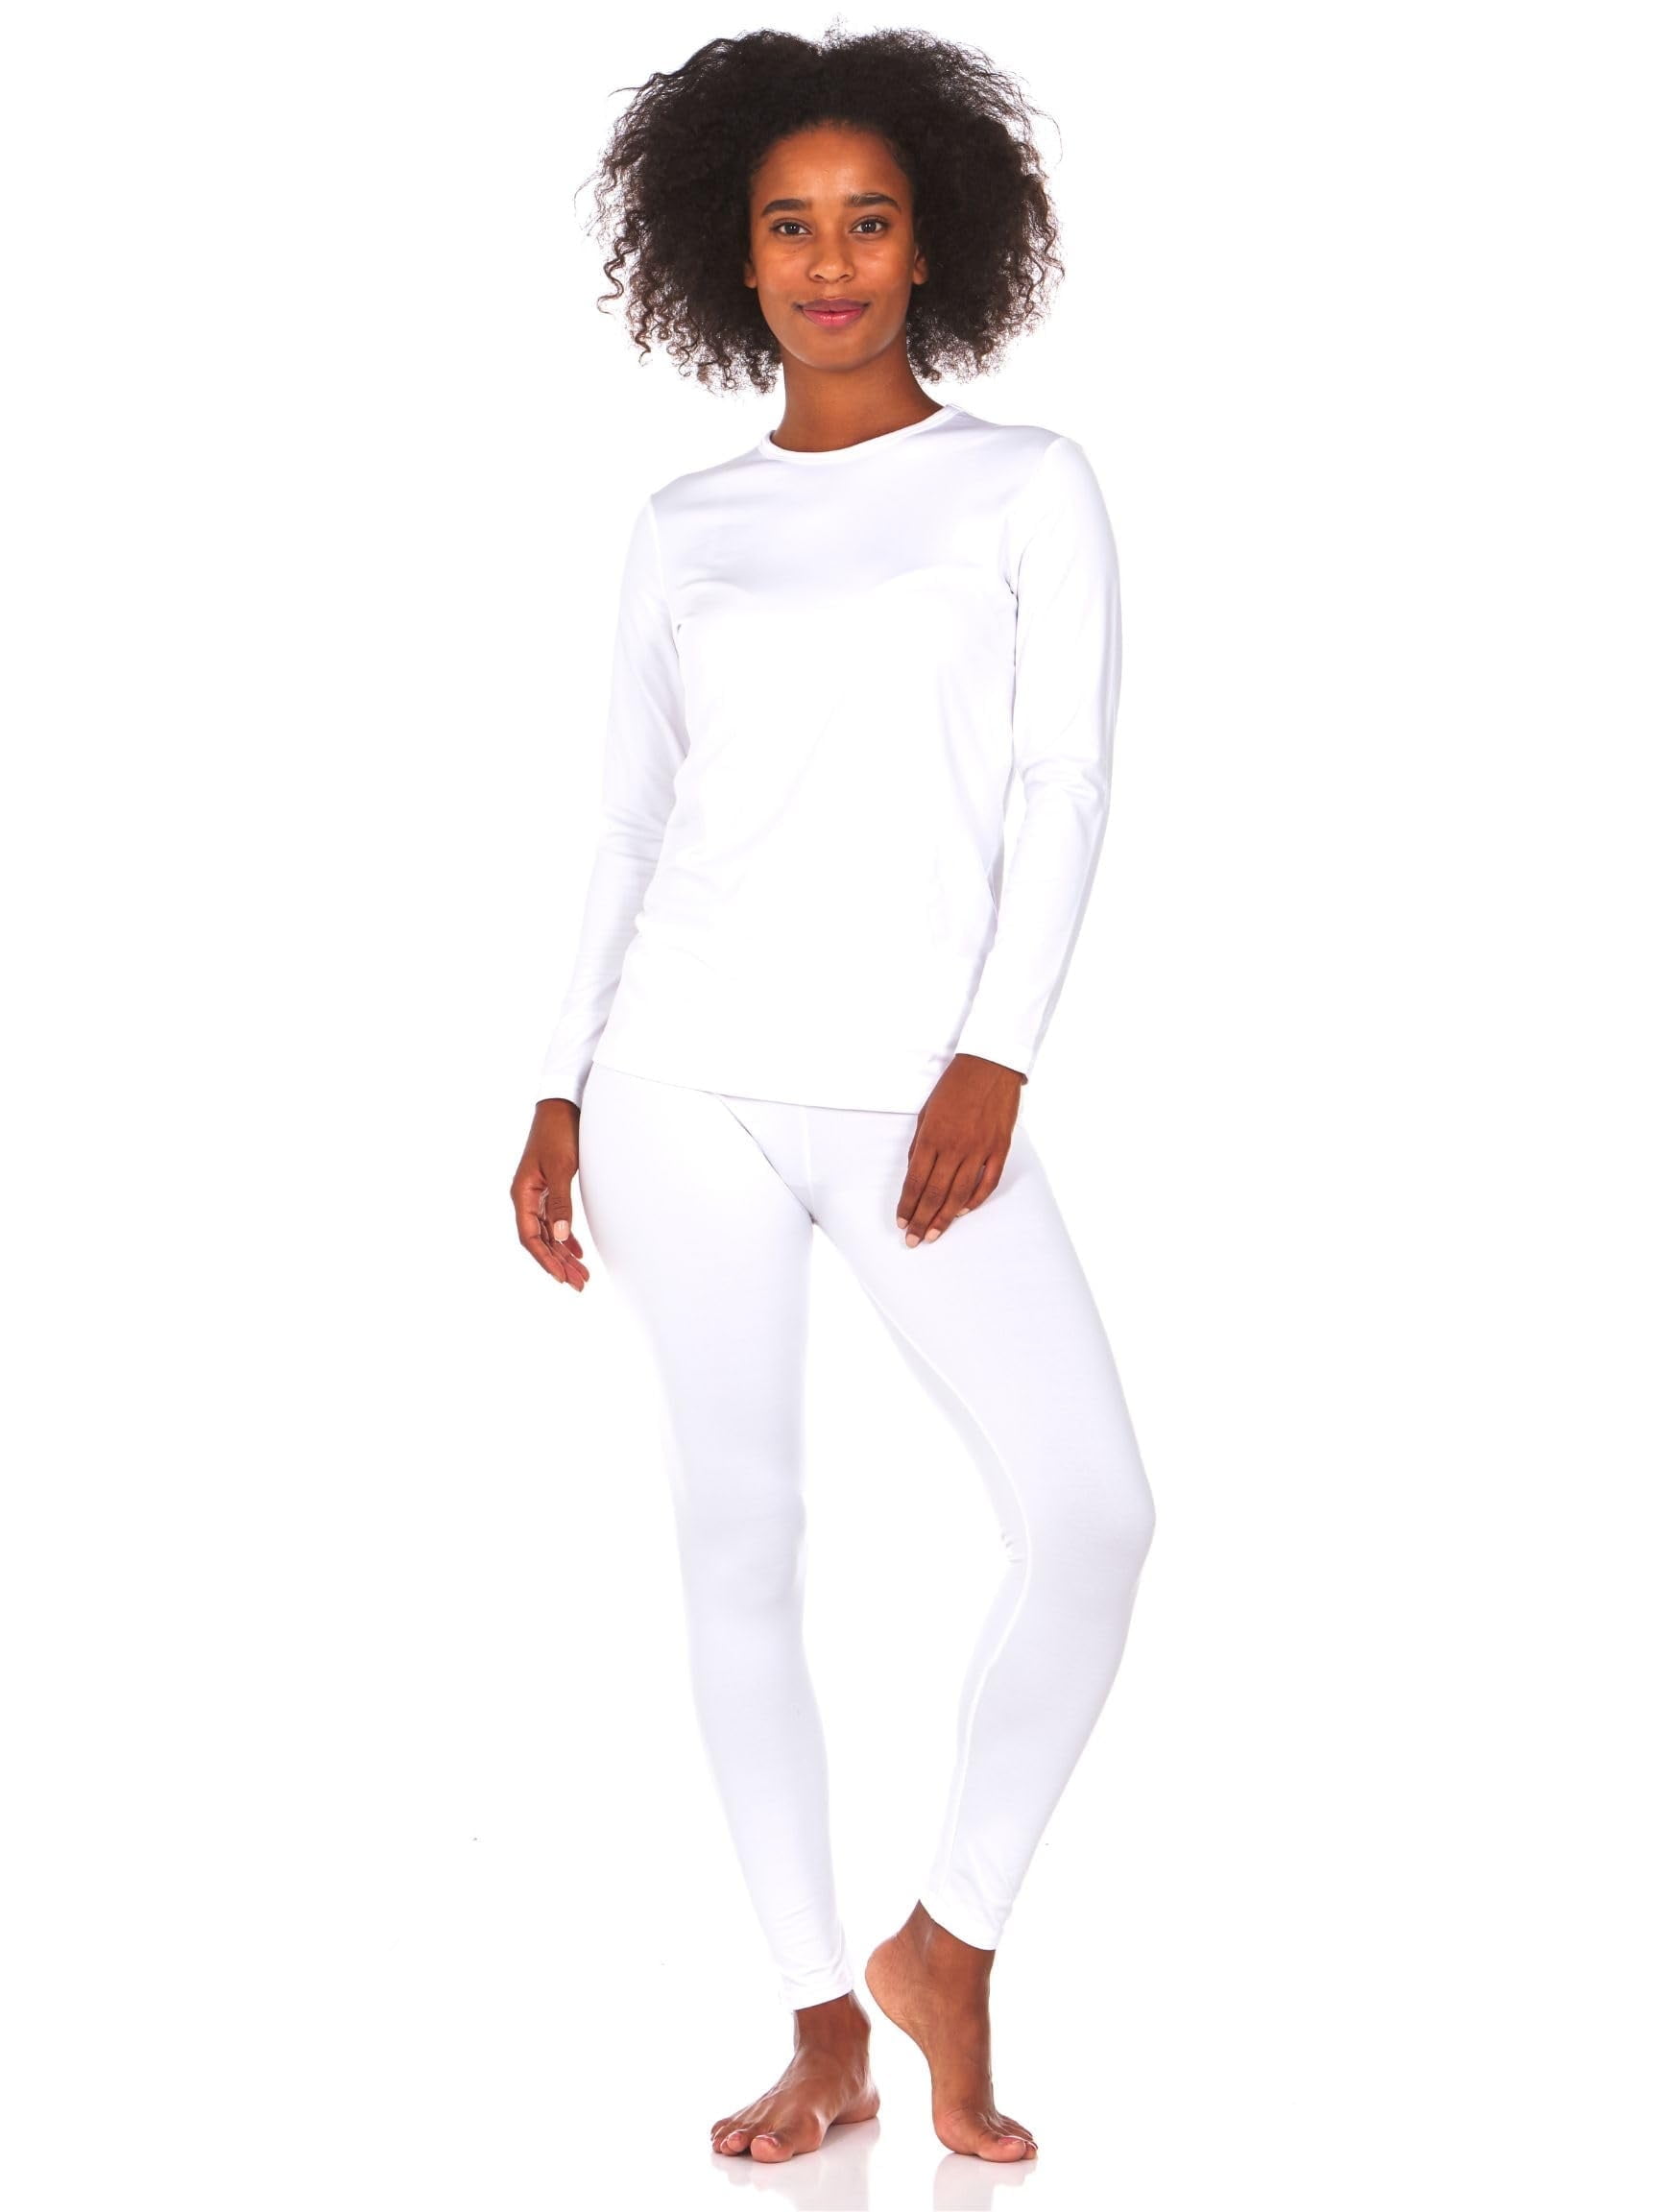 Winter Thermajane Thermal Underwear Set Set For Men And Women Fleece Long  Johns For Warmth In Cold Weather, Sizes L 6XL From Xiguanchu, $22.13